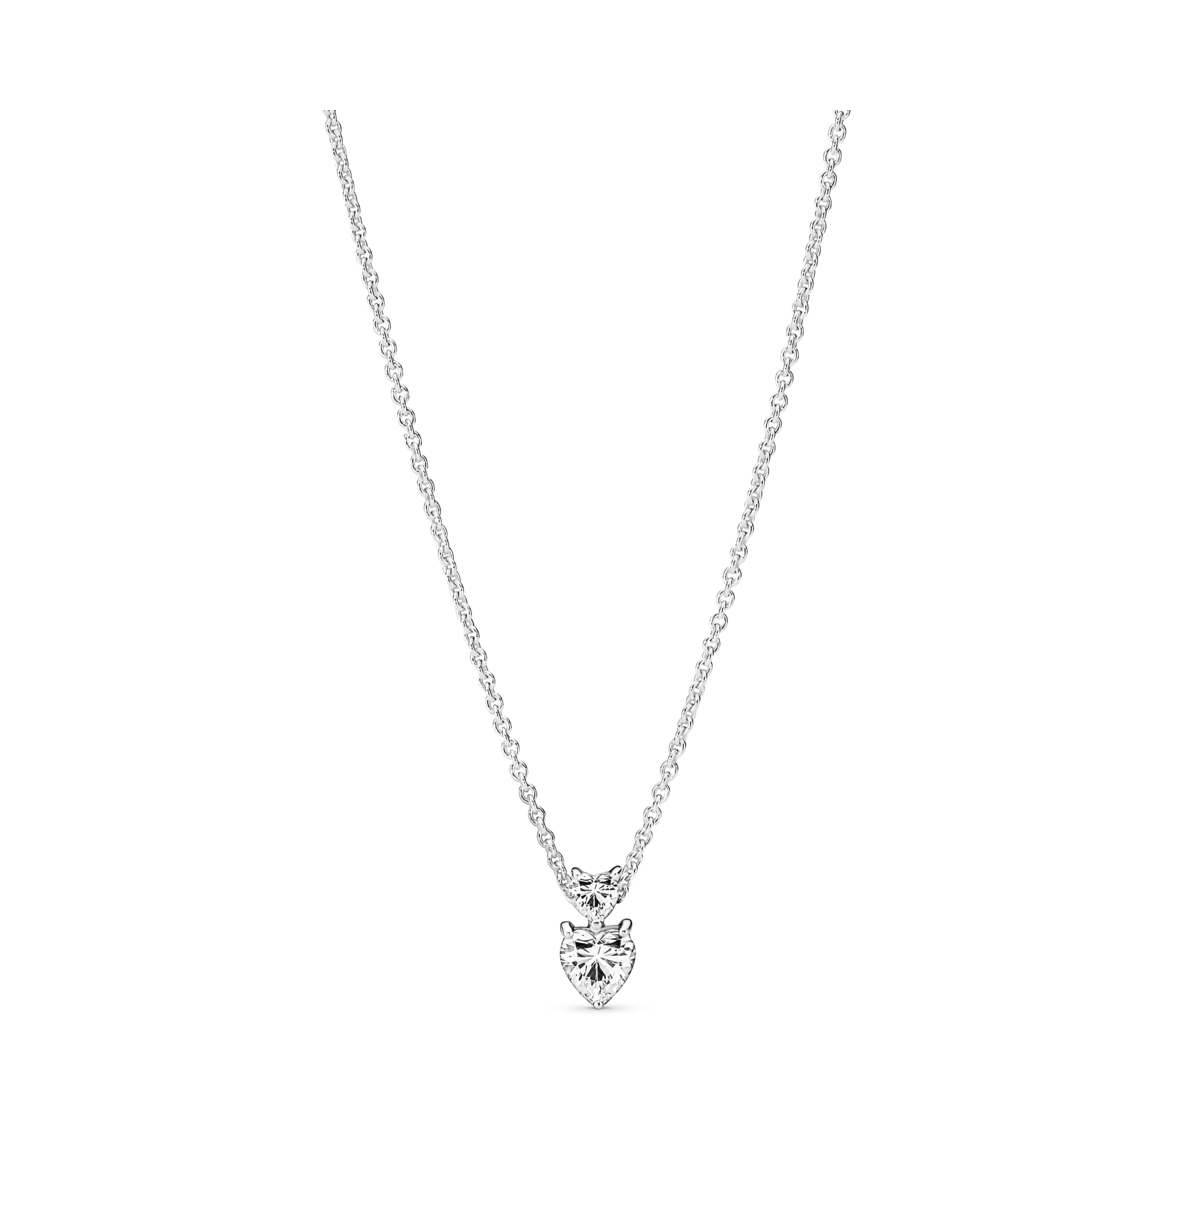 Pandora Timeless Sterling Silver Double Heart Pendant Sparkling Cubic Zirconia Collier Necklace